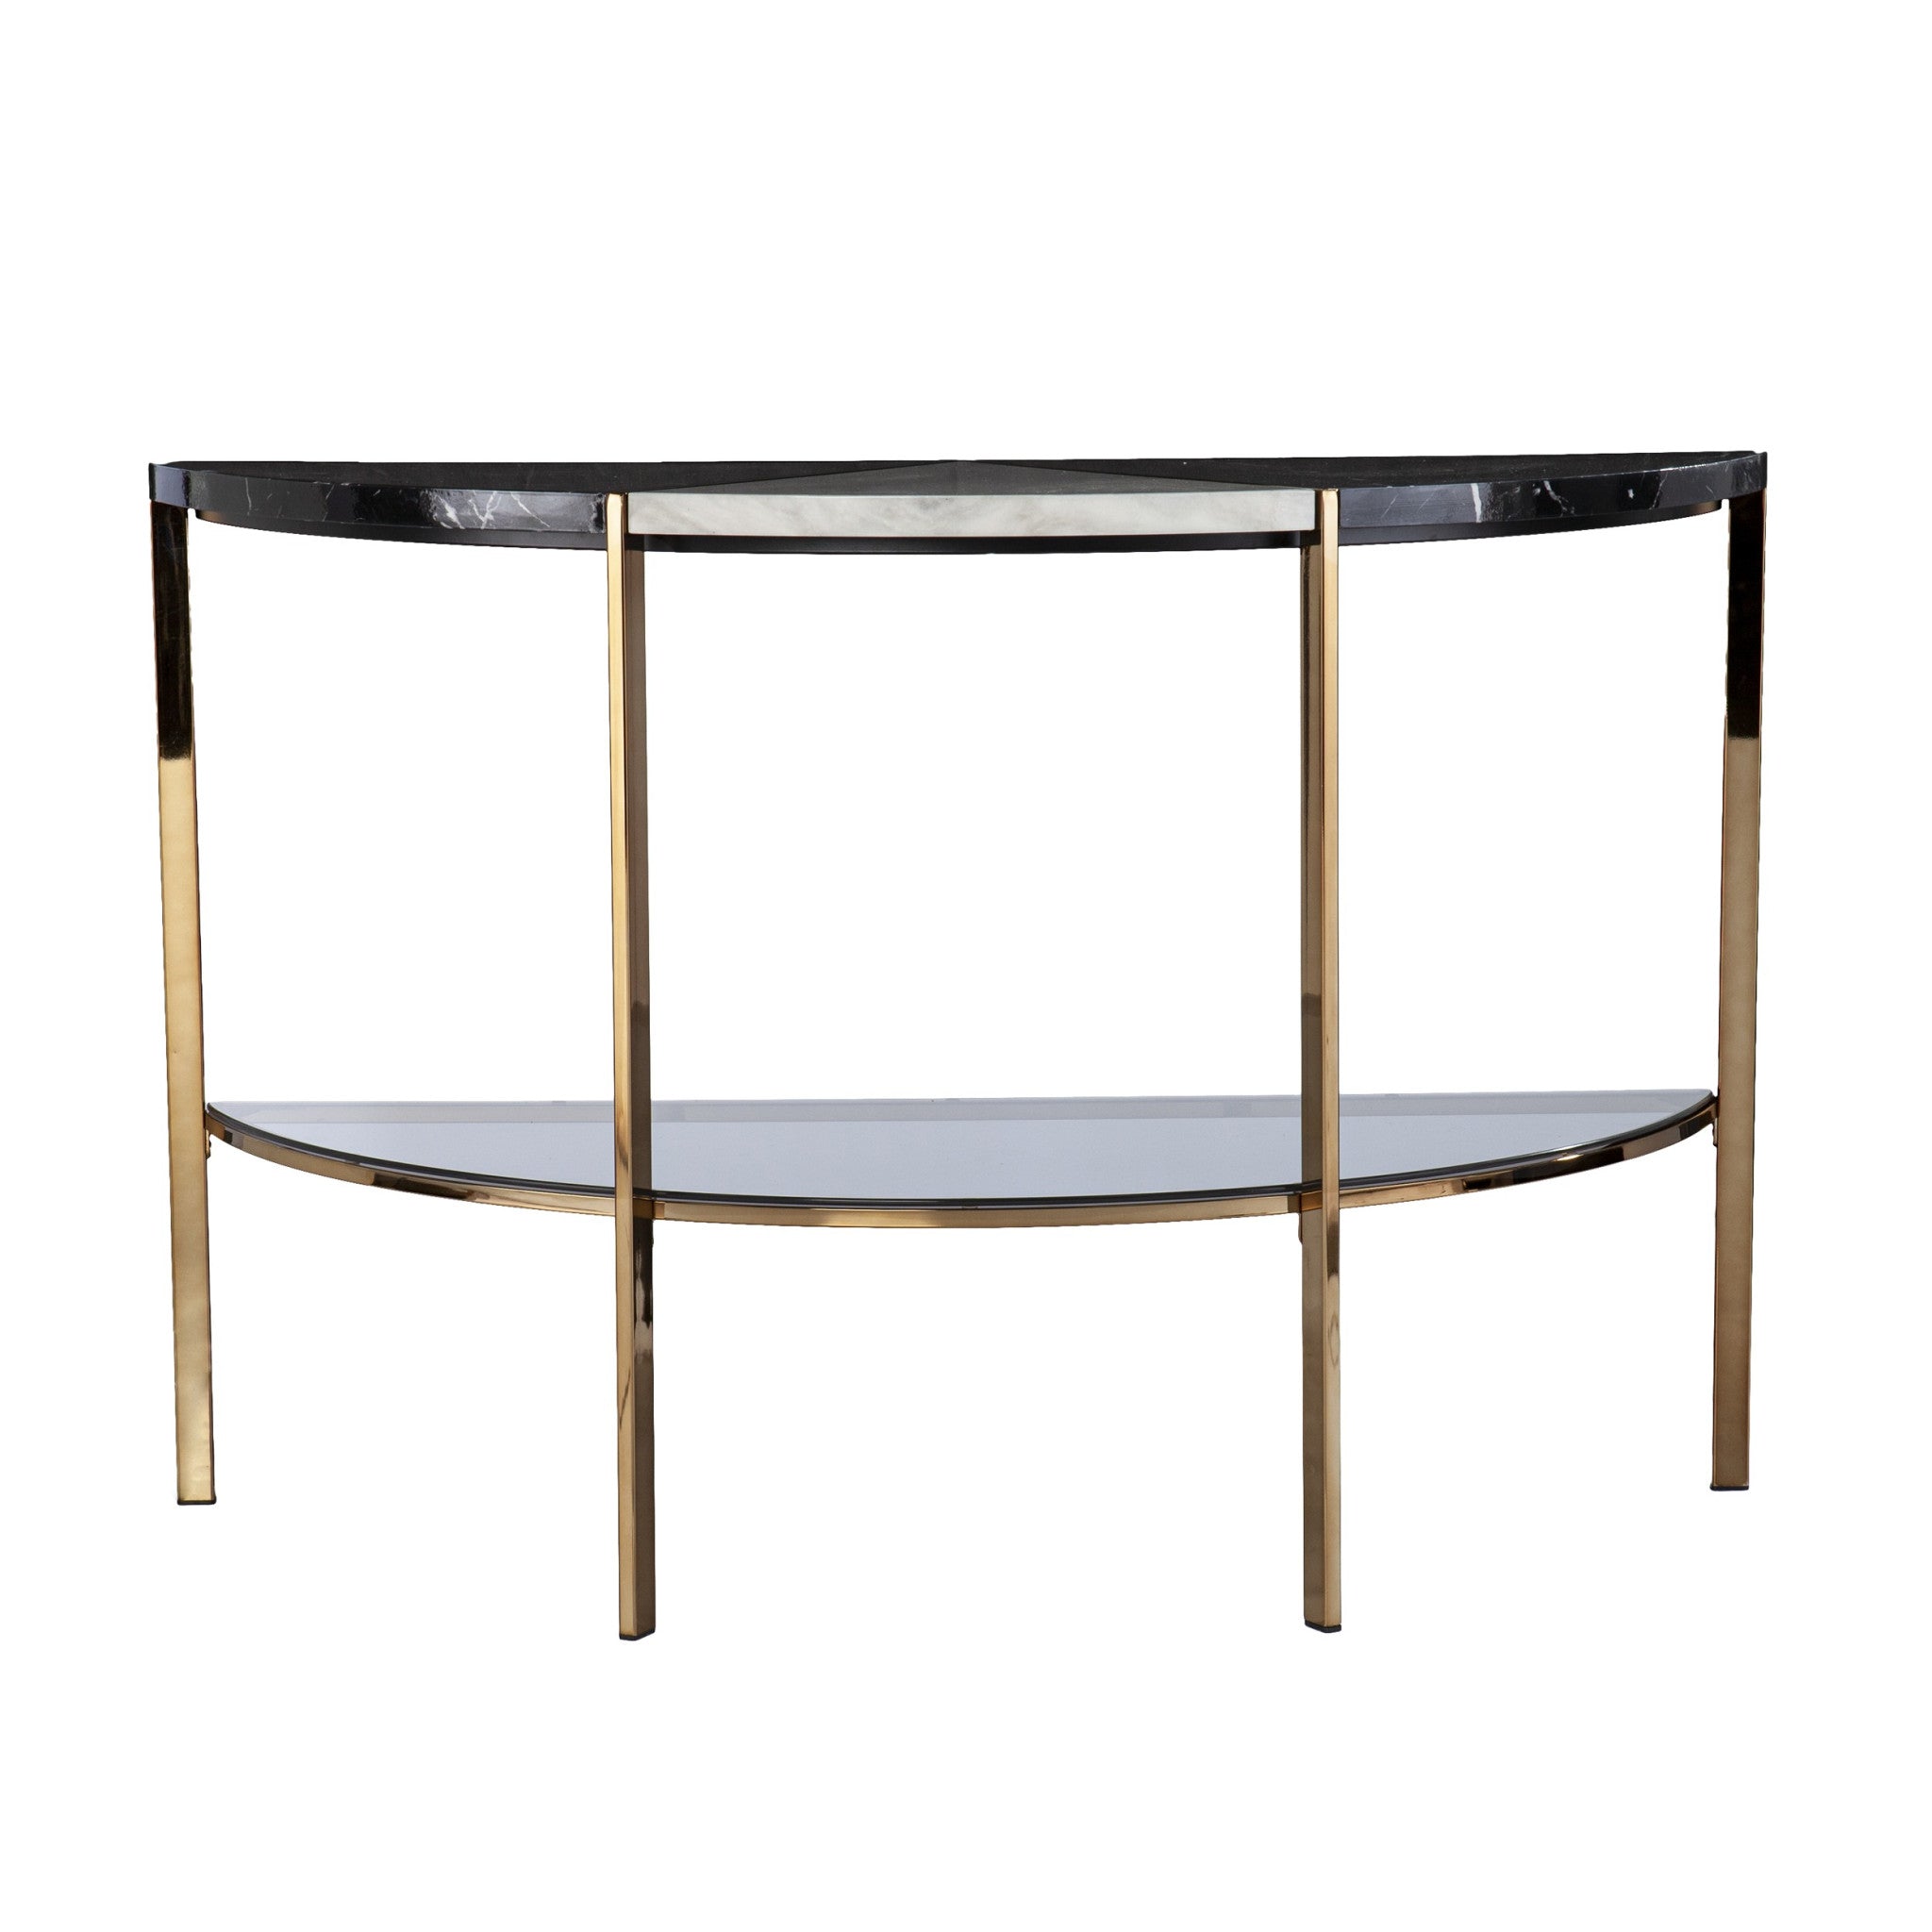 44" Black and White and Champagne Faux Marble Half Moon Console Table With Storage